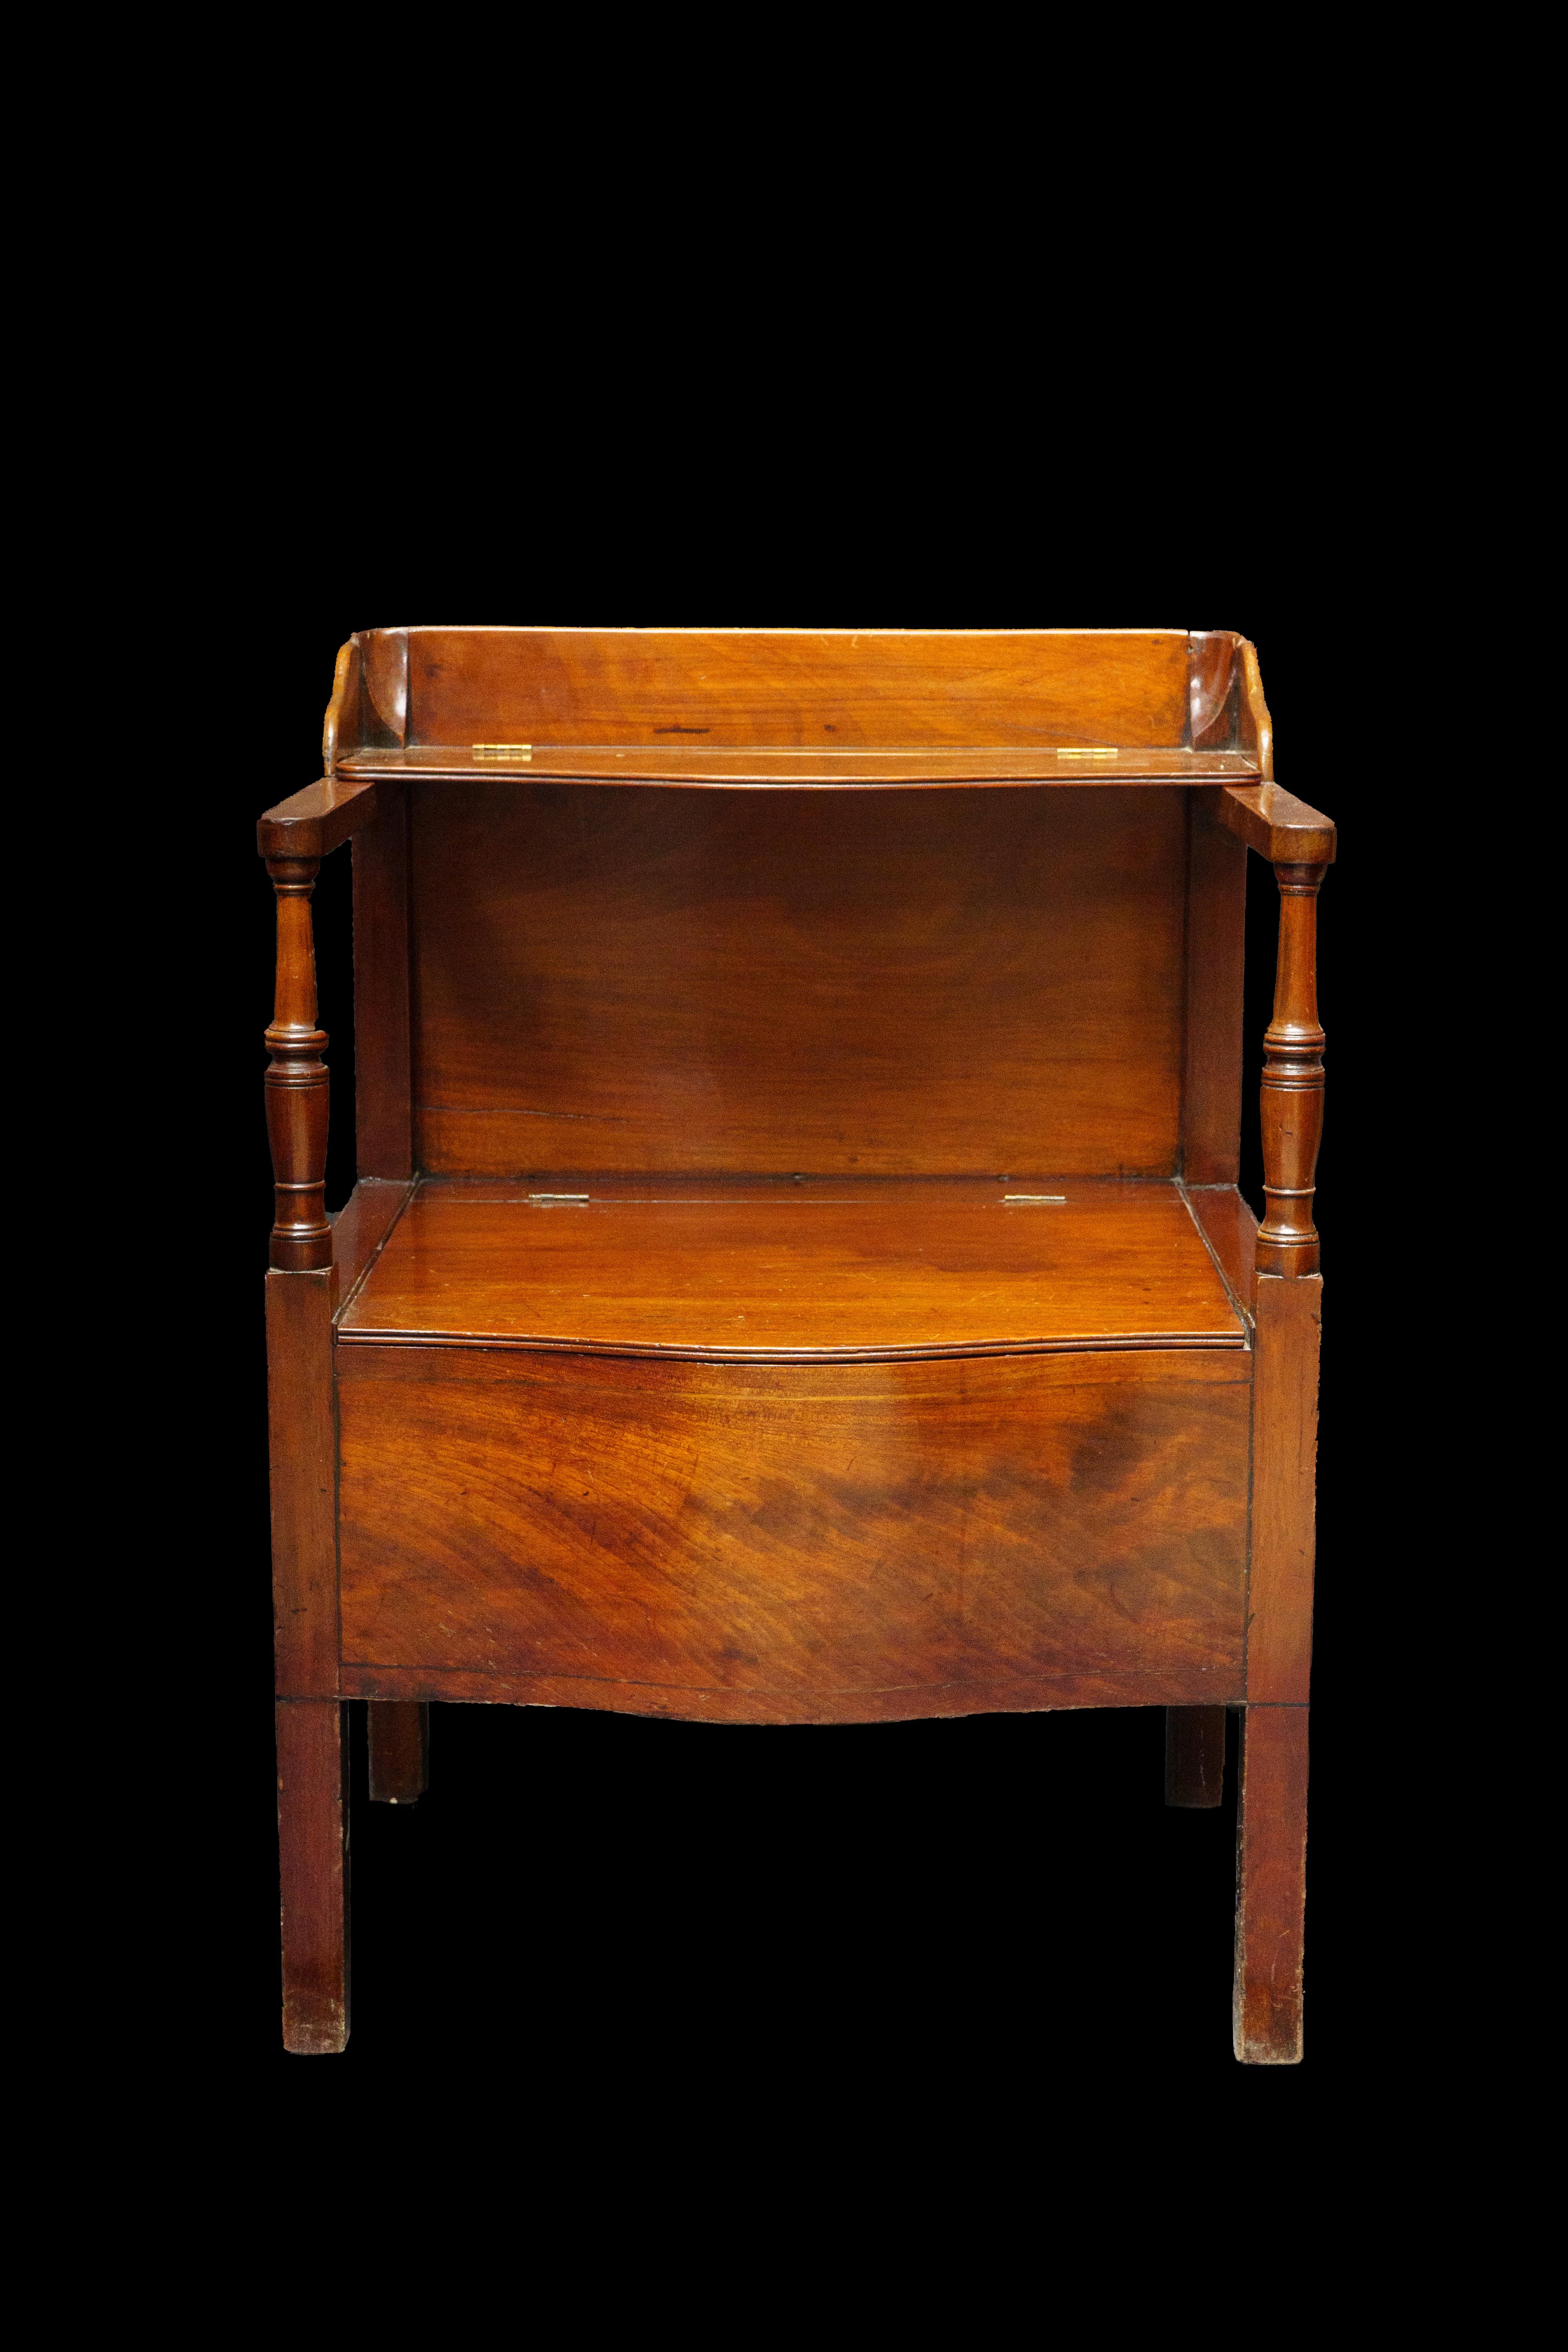 English Mahogany bedside commode table/chair:

Measures: 23